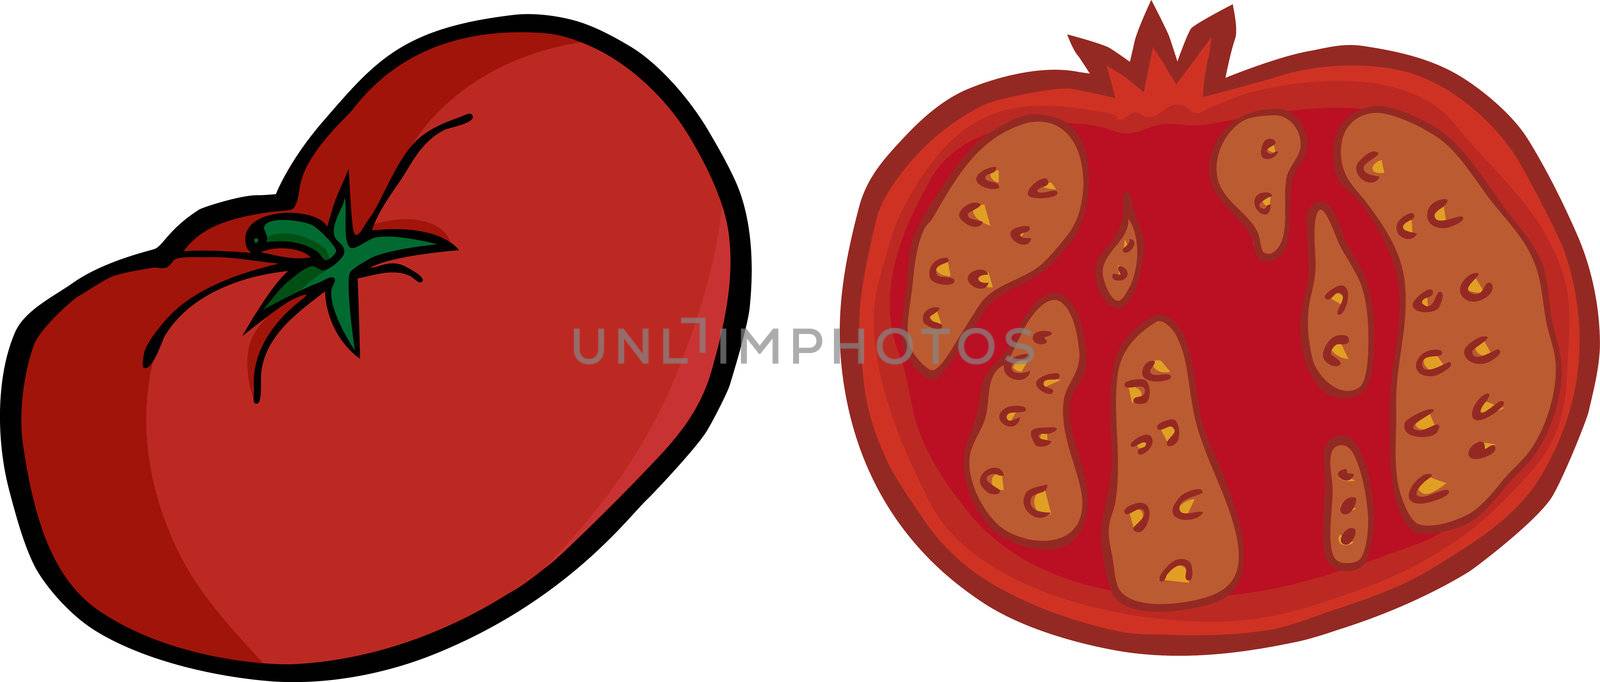 One large tomato illustration with a sliced version